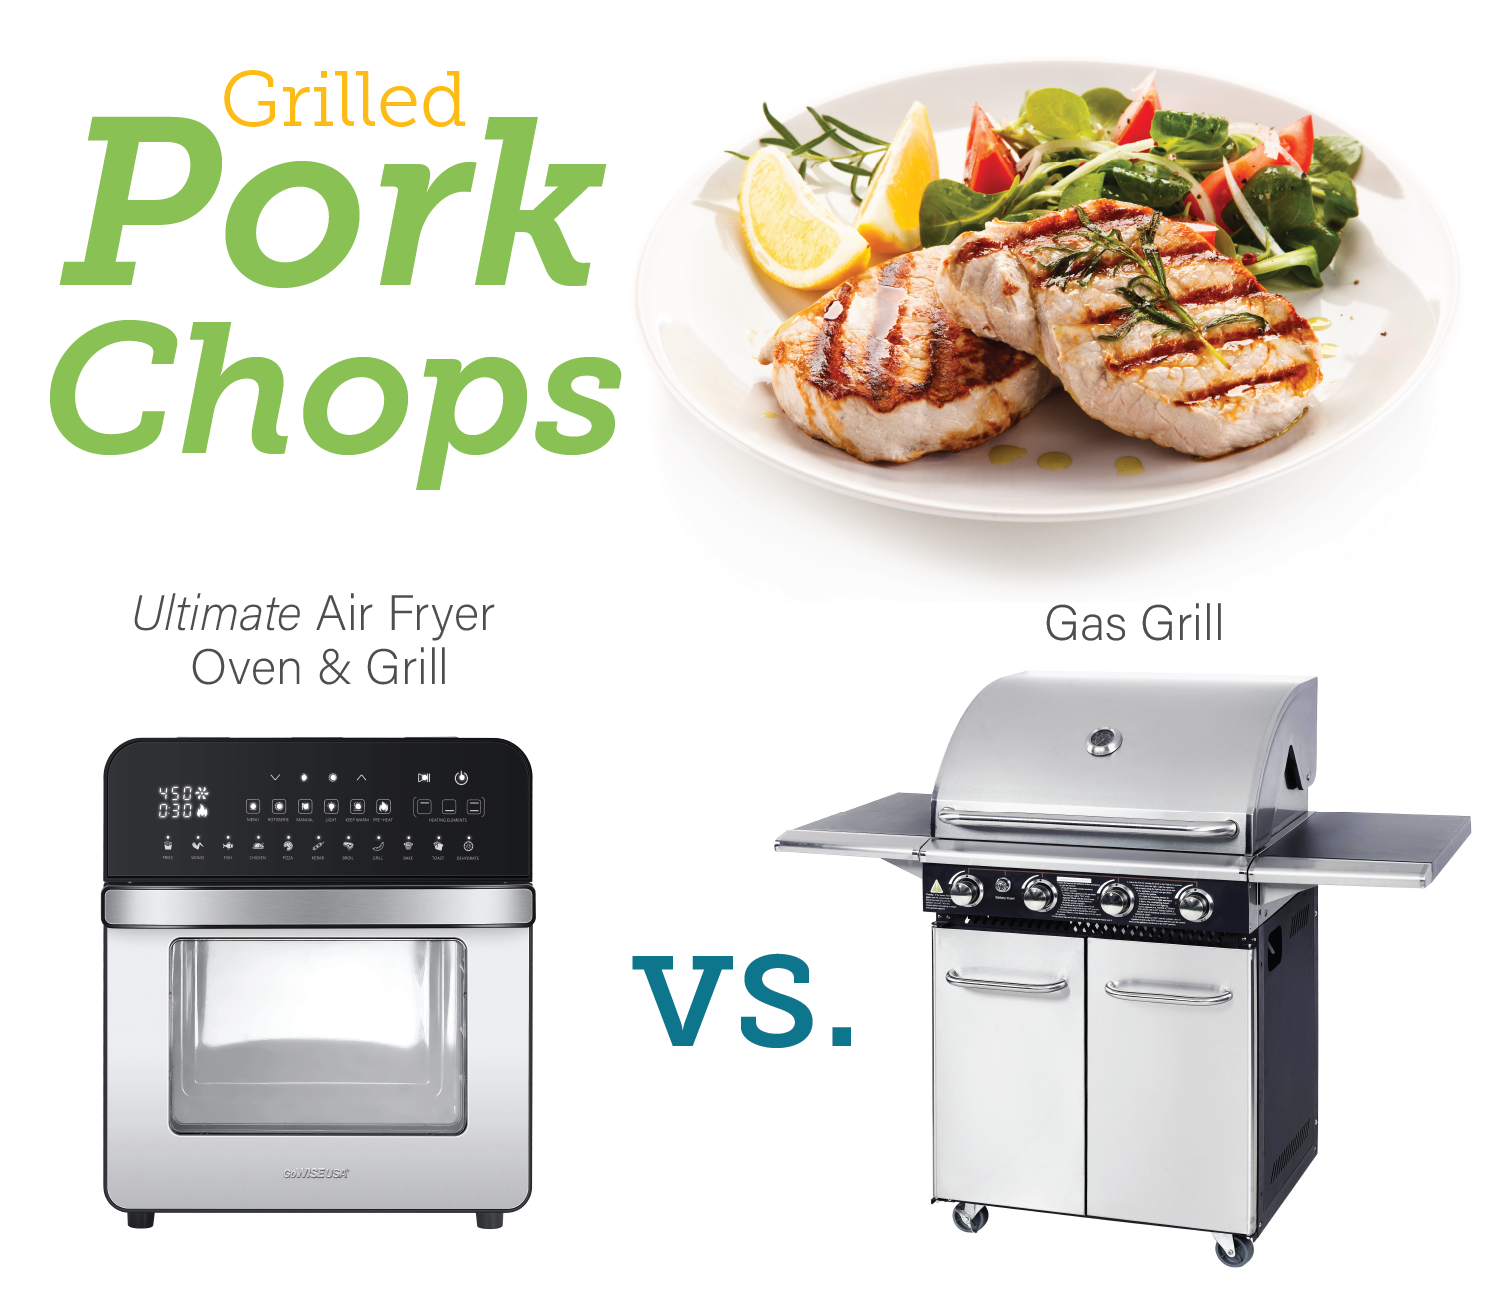 Ultimate Air Fryer vs. Grill Challenge!